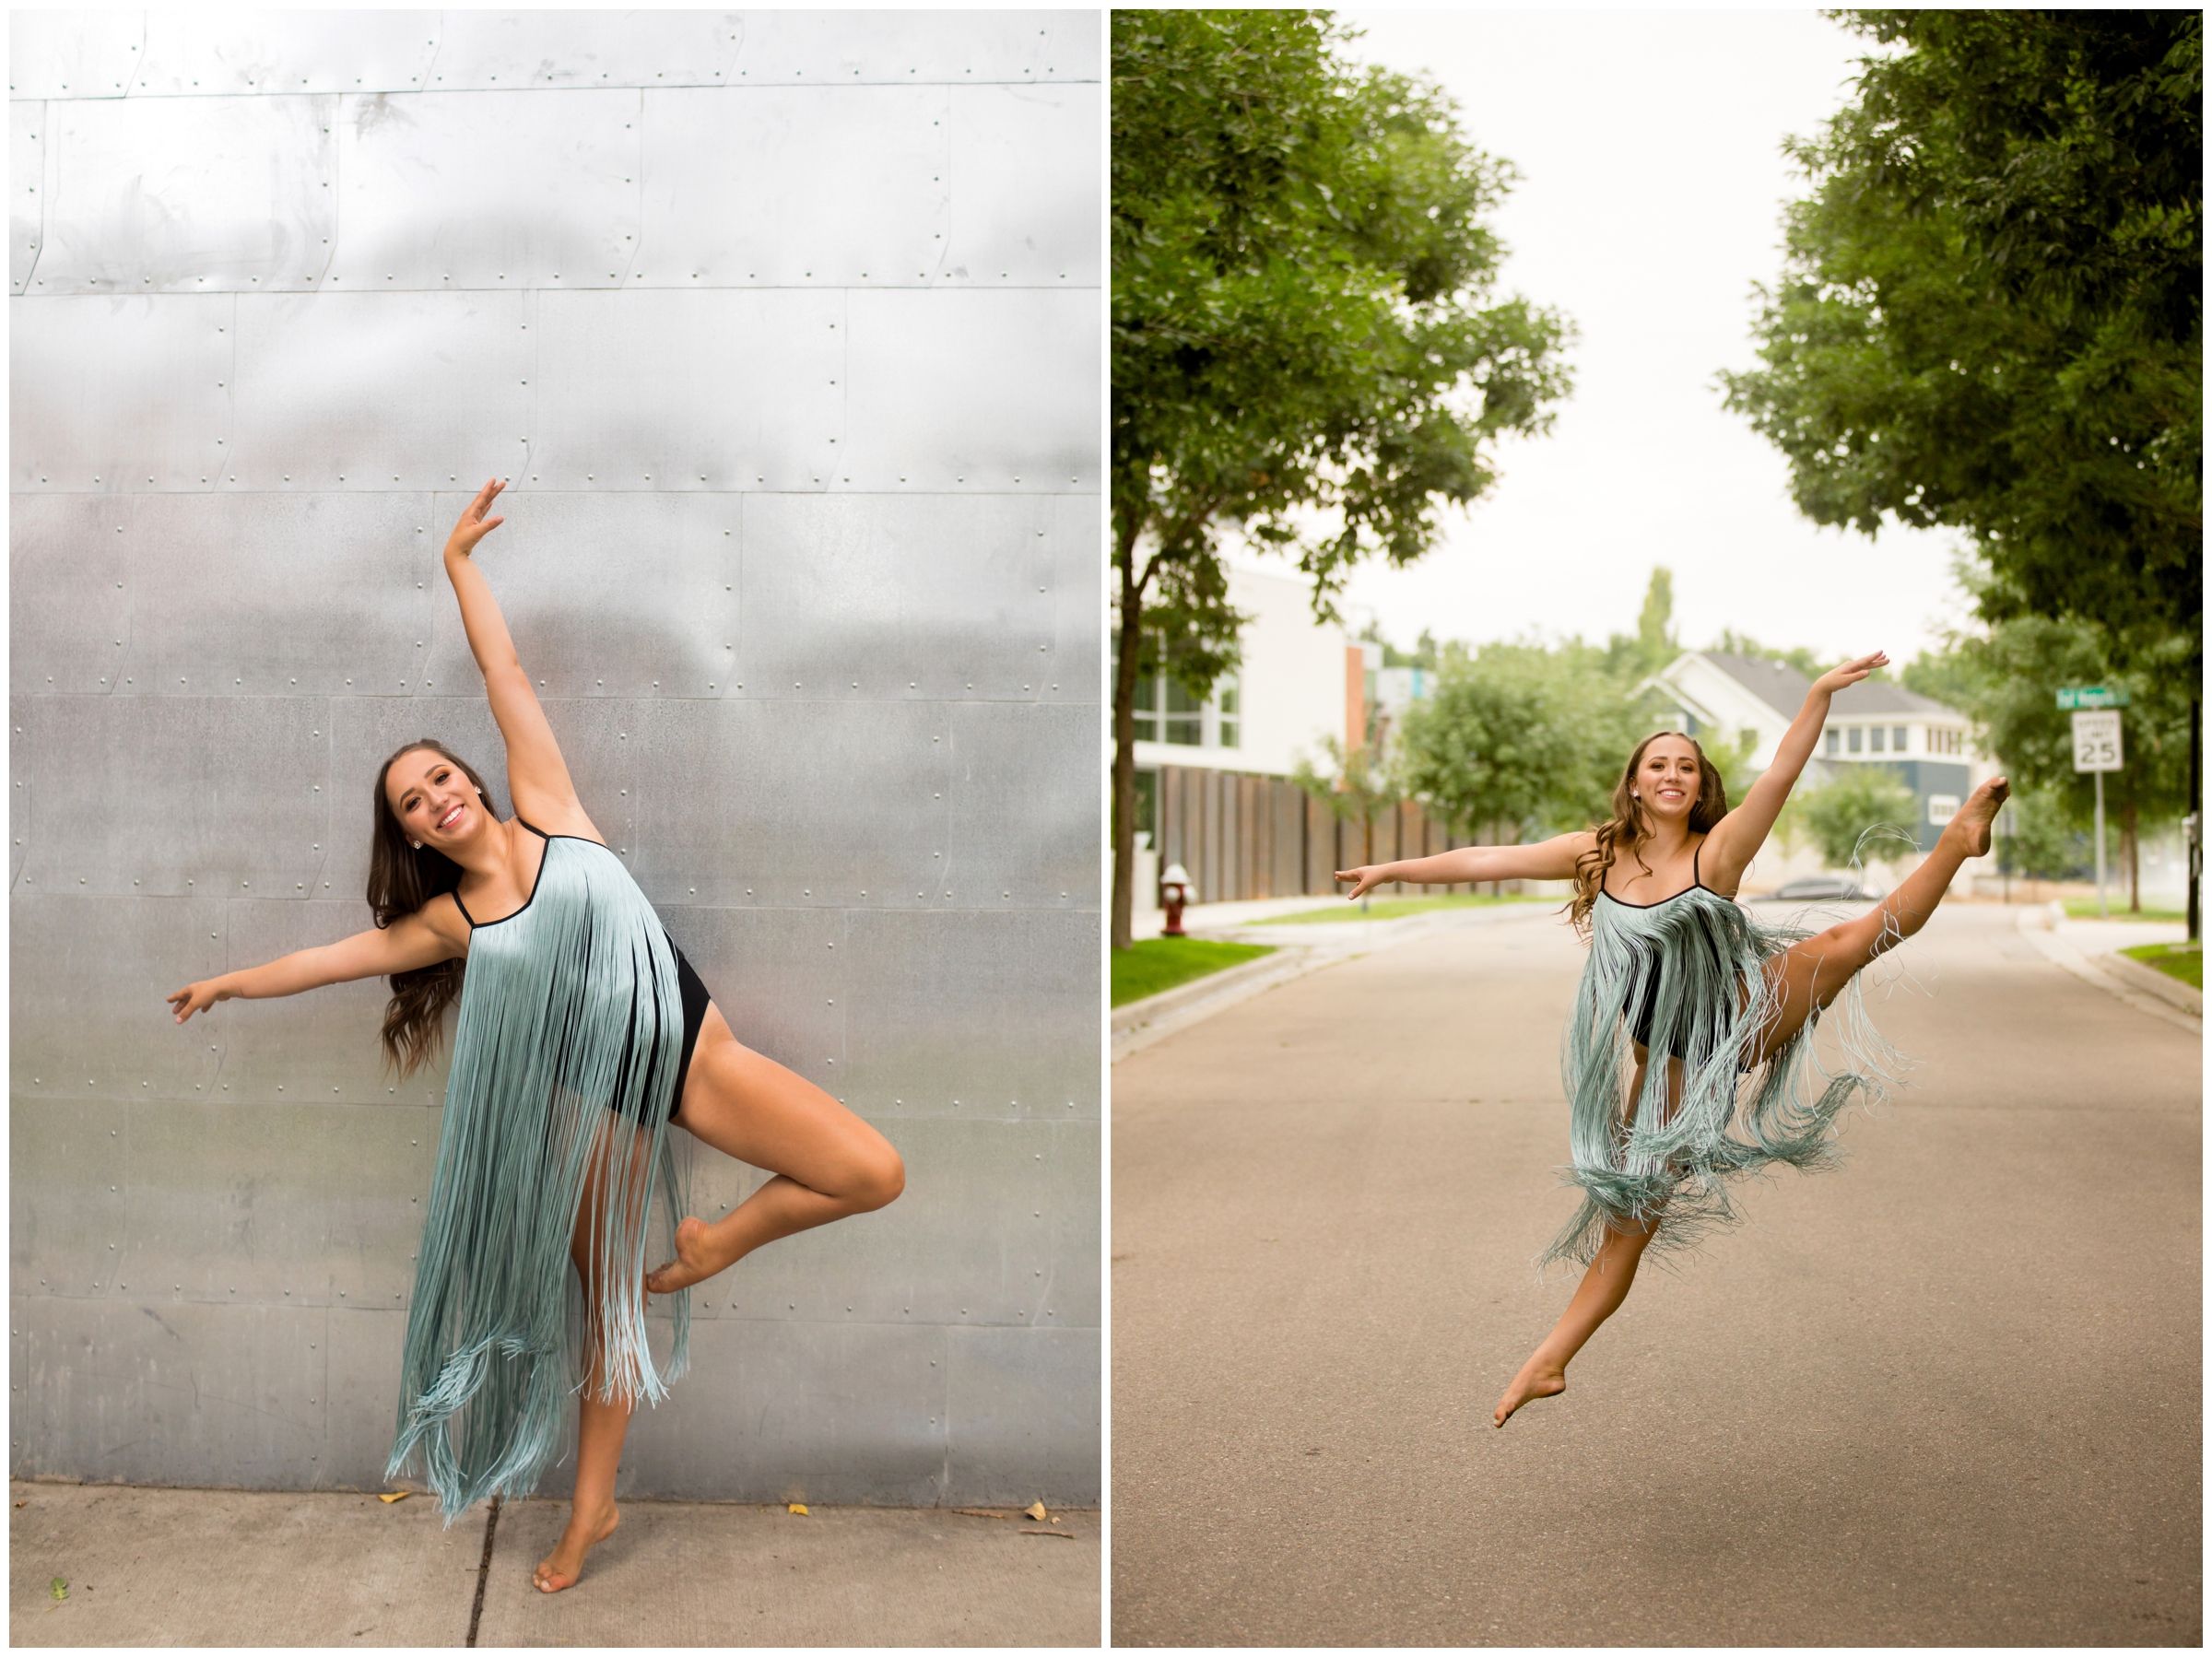 urban dance photography inspiration by Plum Pretty Photography 